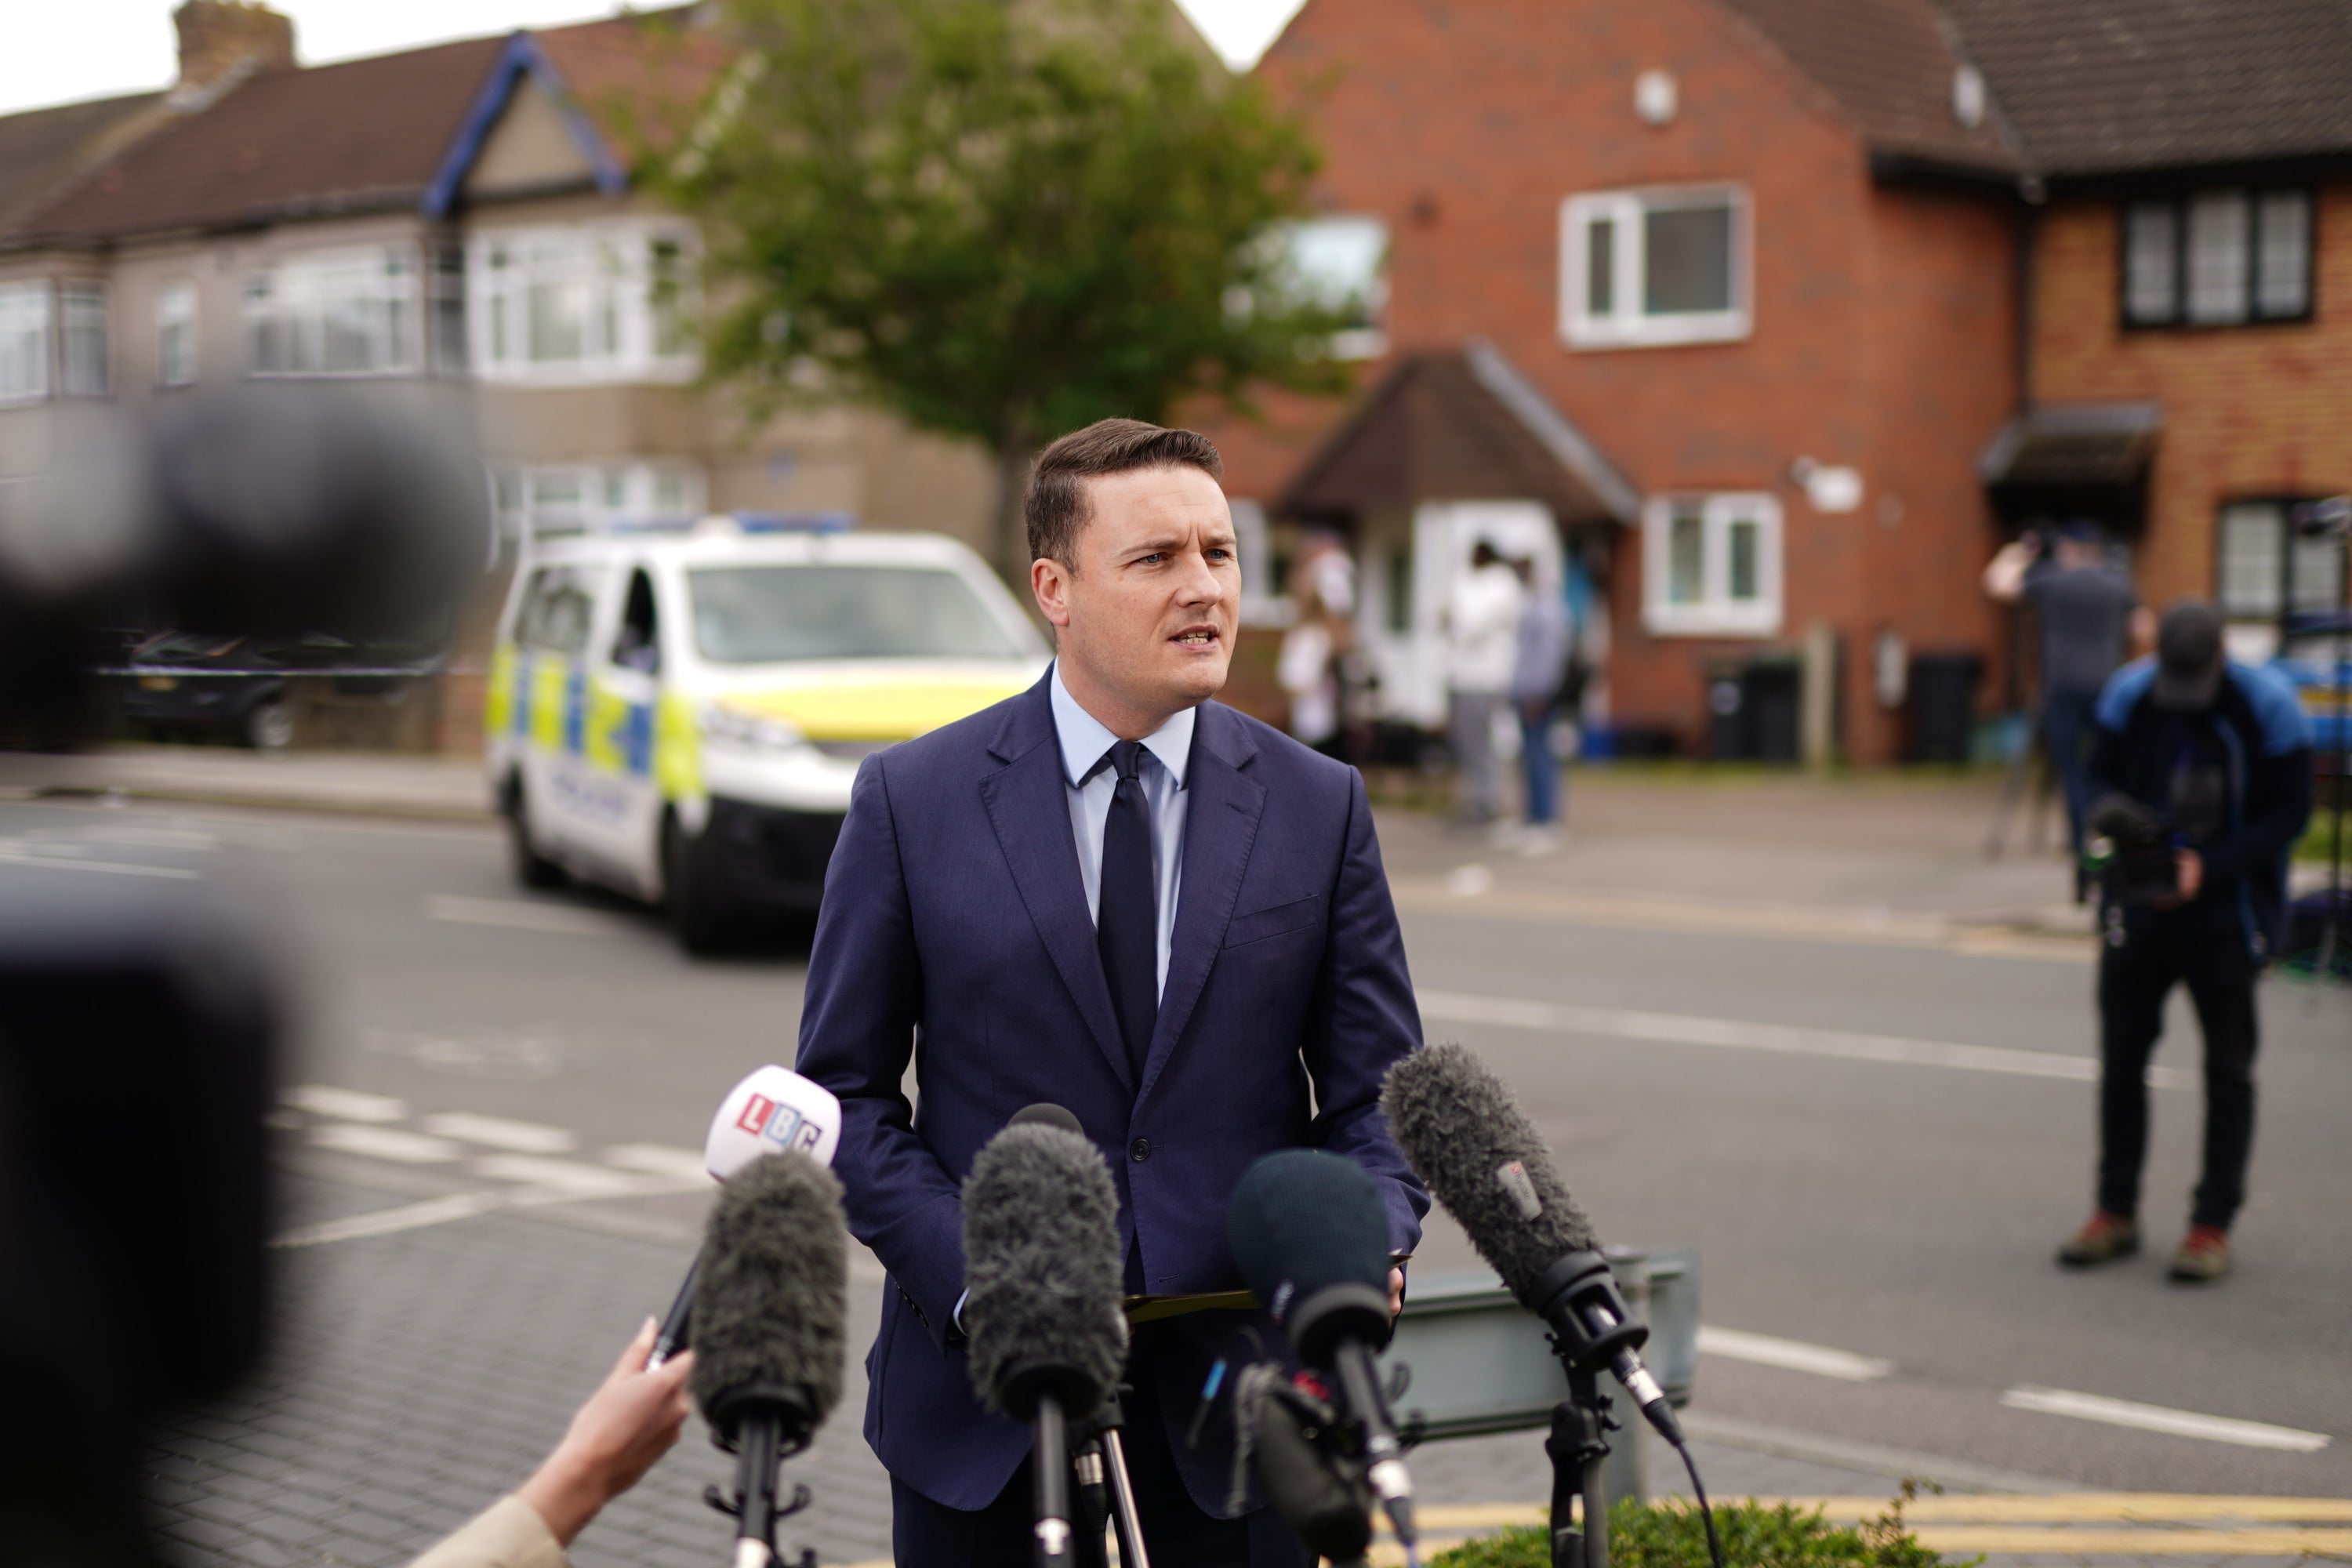 Wes Streeting defended Labour’s stance on the policy